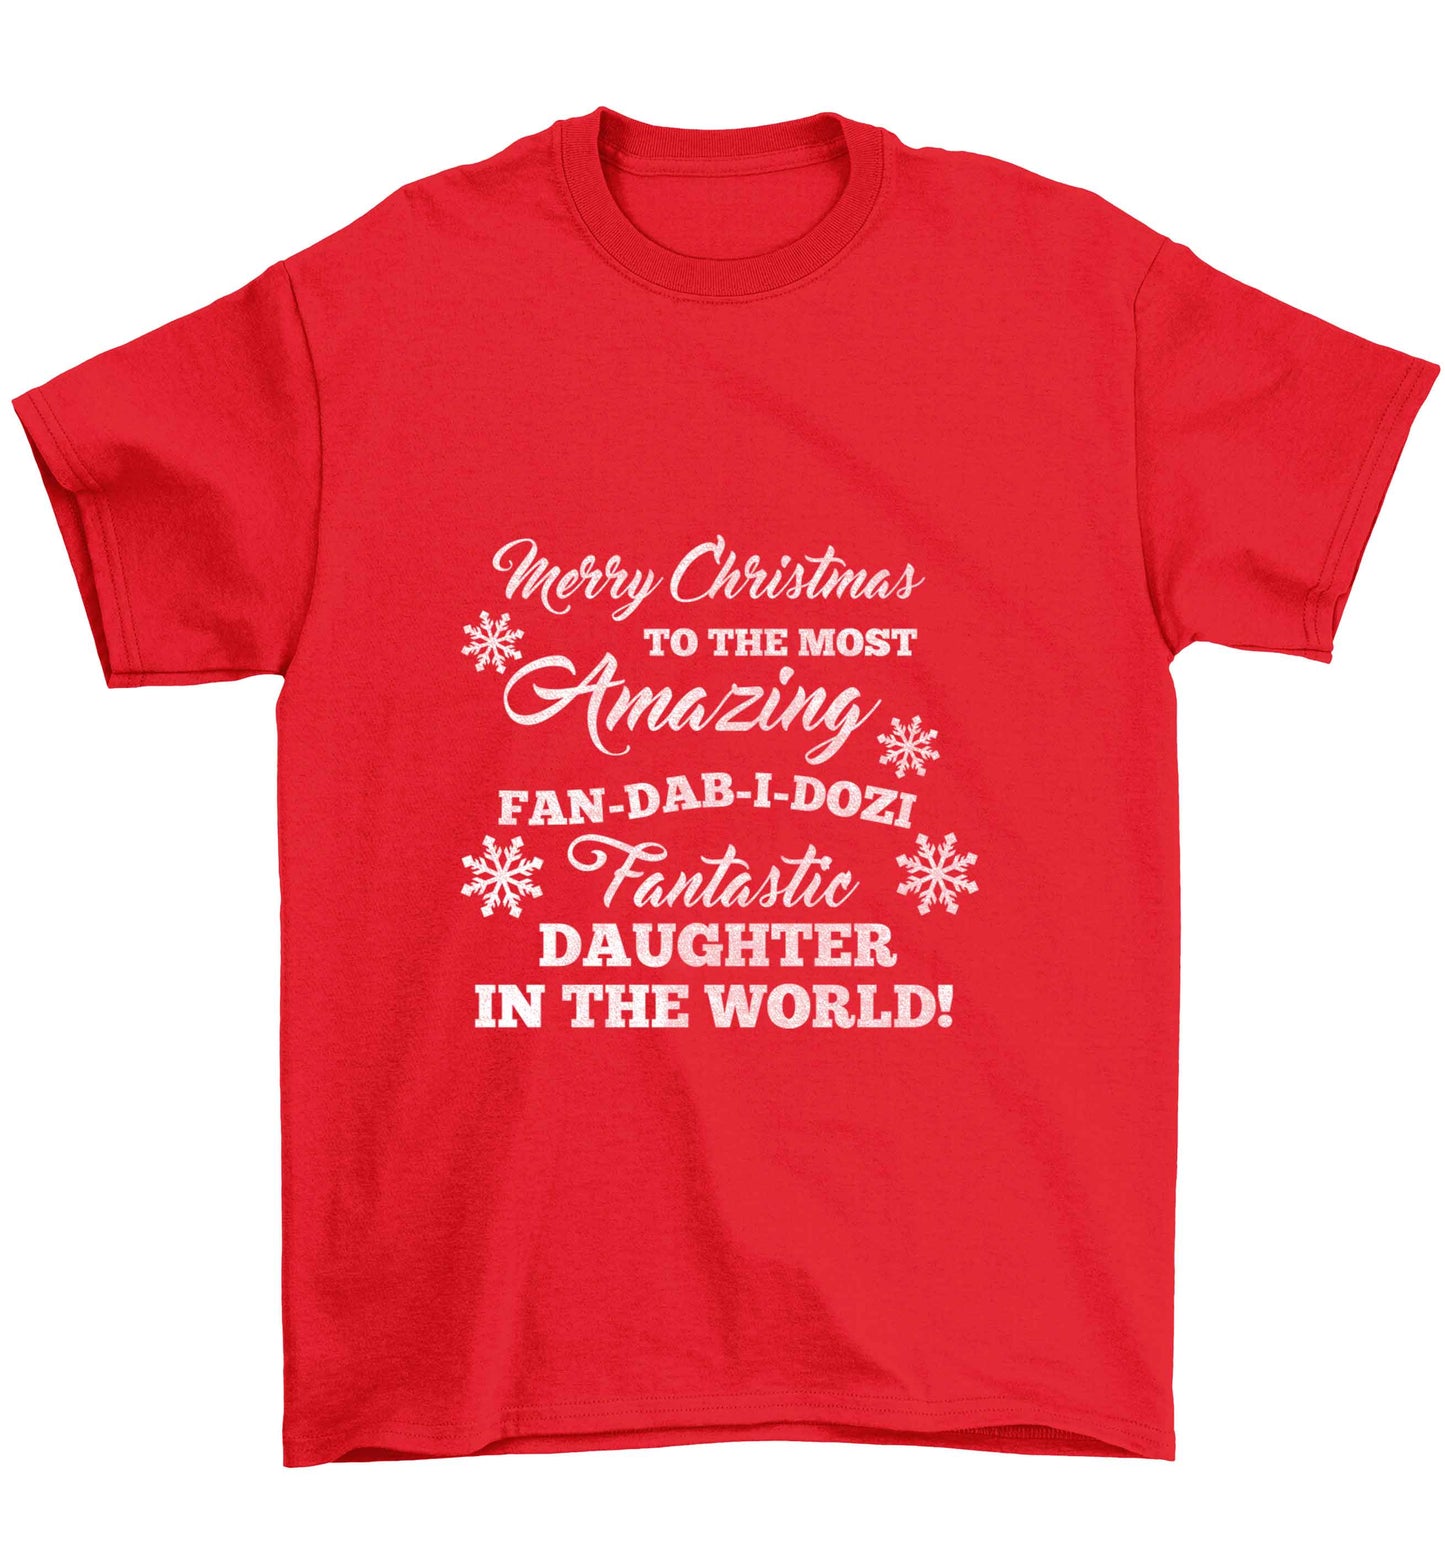 Merry Christmas to the most amazing fan-dab-i-dozi fantasic Daughter in the world Children's red Tshirt 12-13 Years